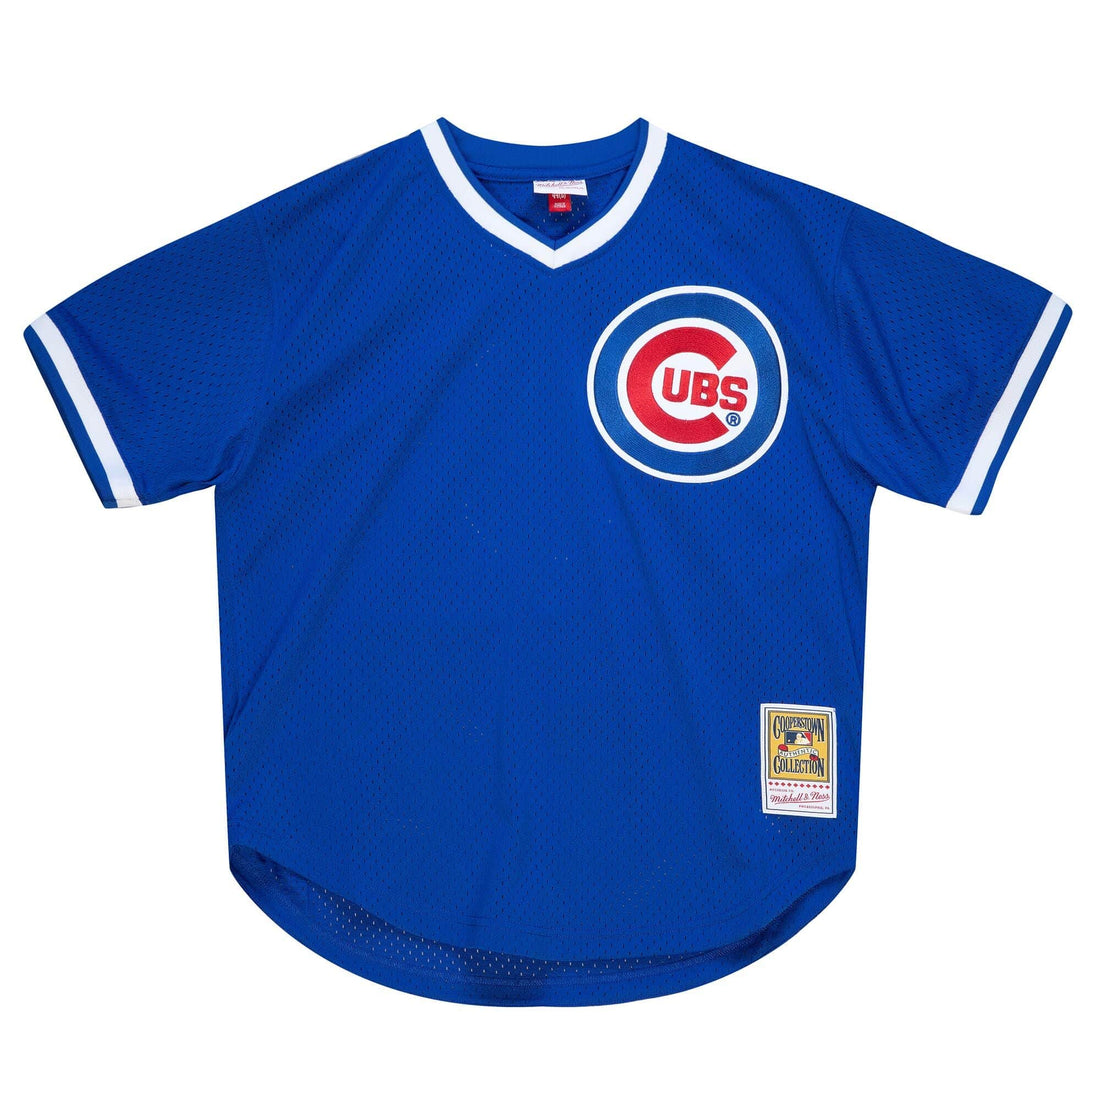 Fanatics Authentic Andre Dawson White Chicago Cubs Autographed Mitchell & Ness Authentic Jersey